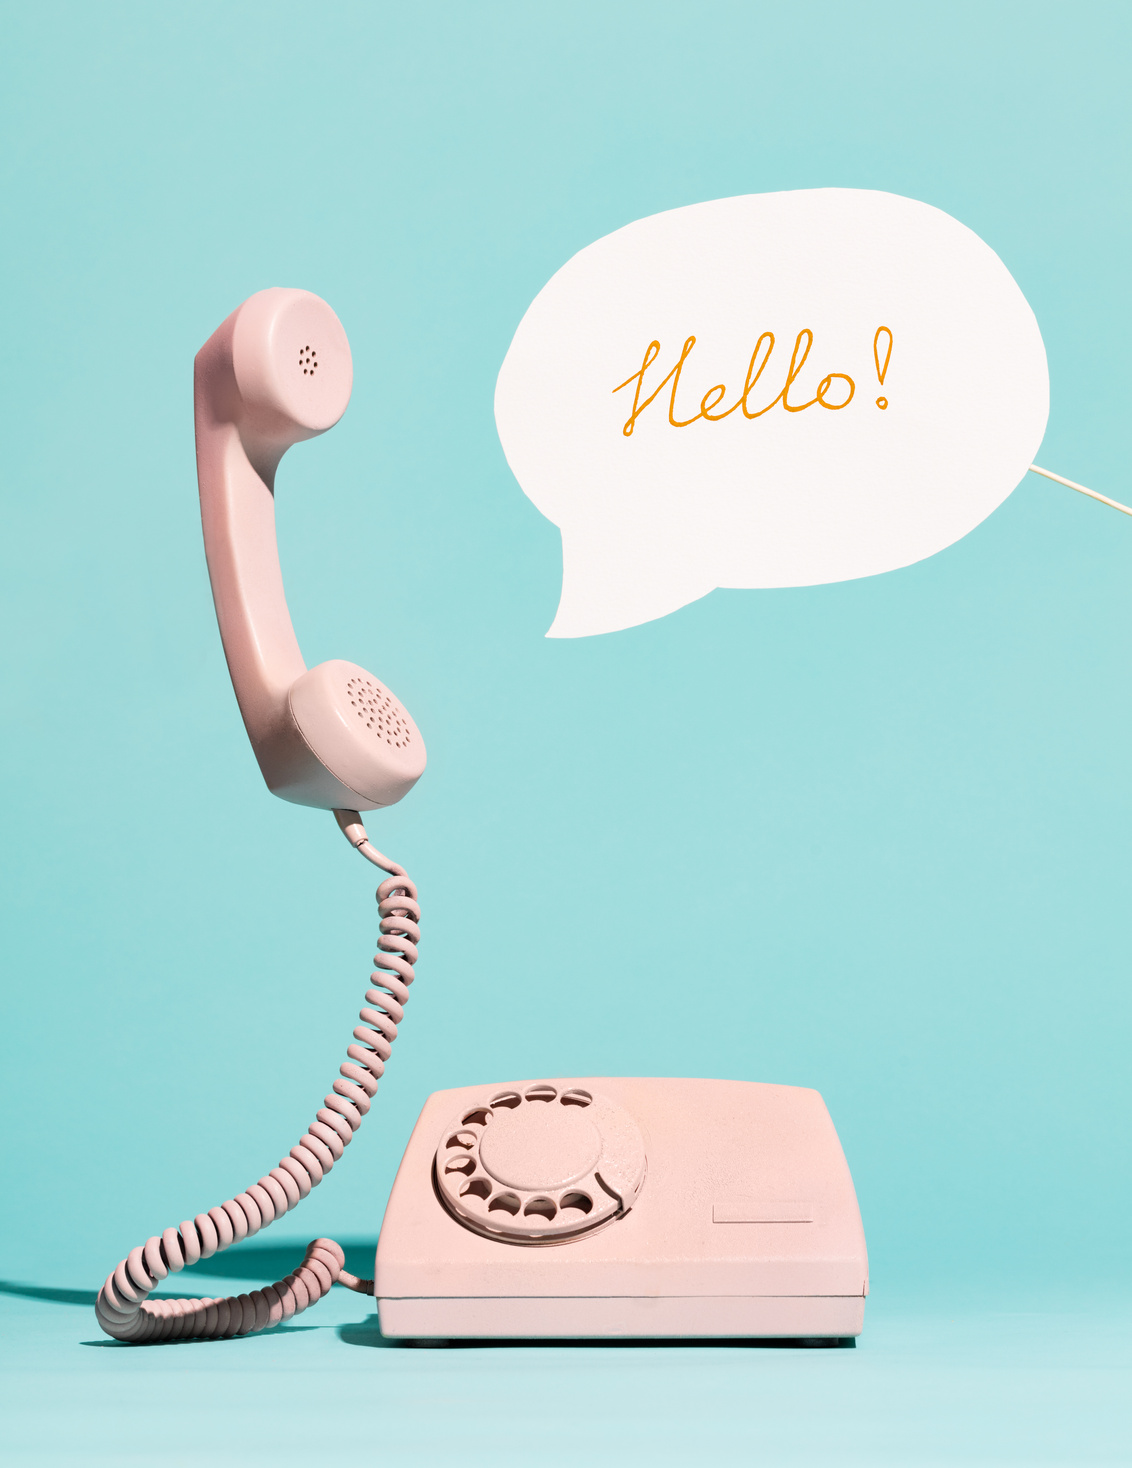 Vintage Phone and Speech Bubble with Hello